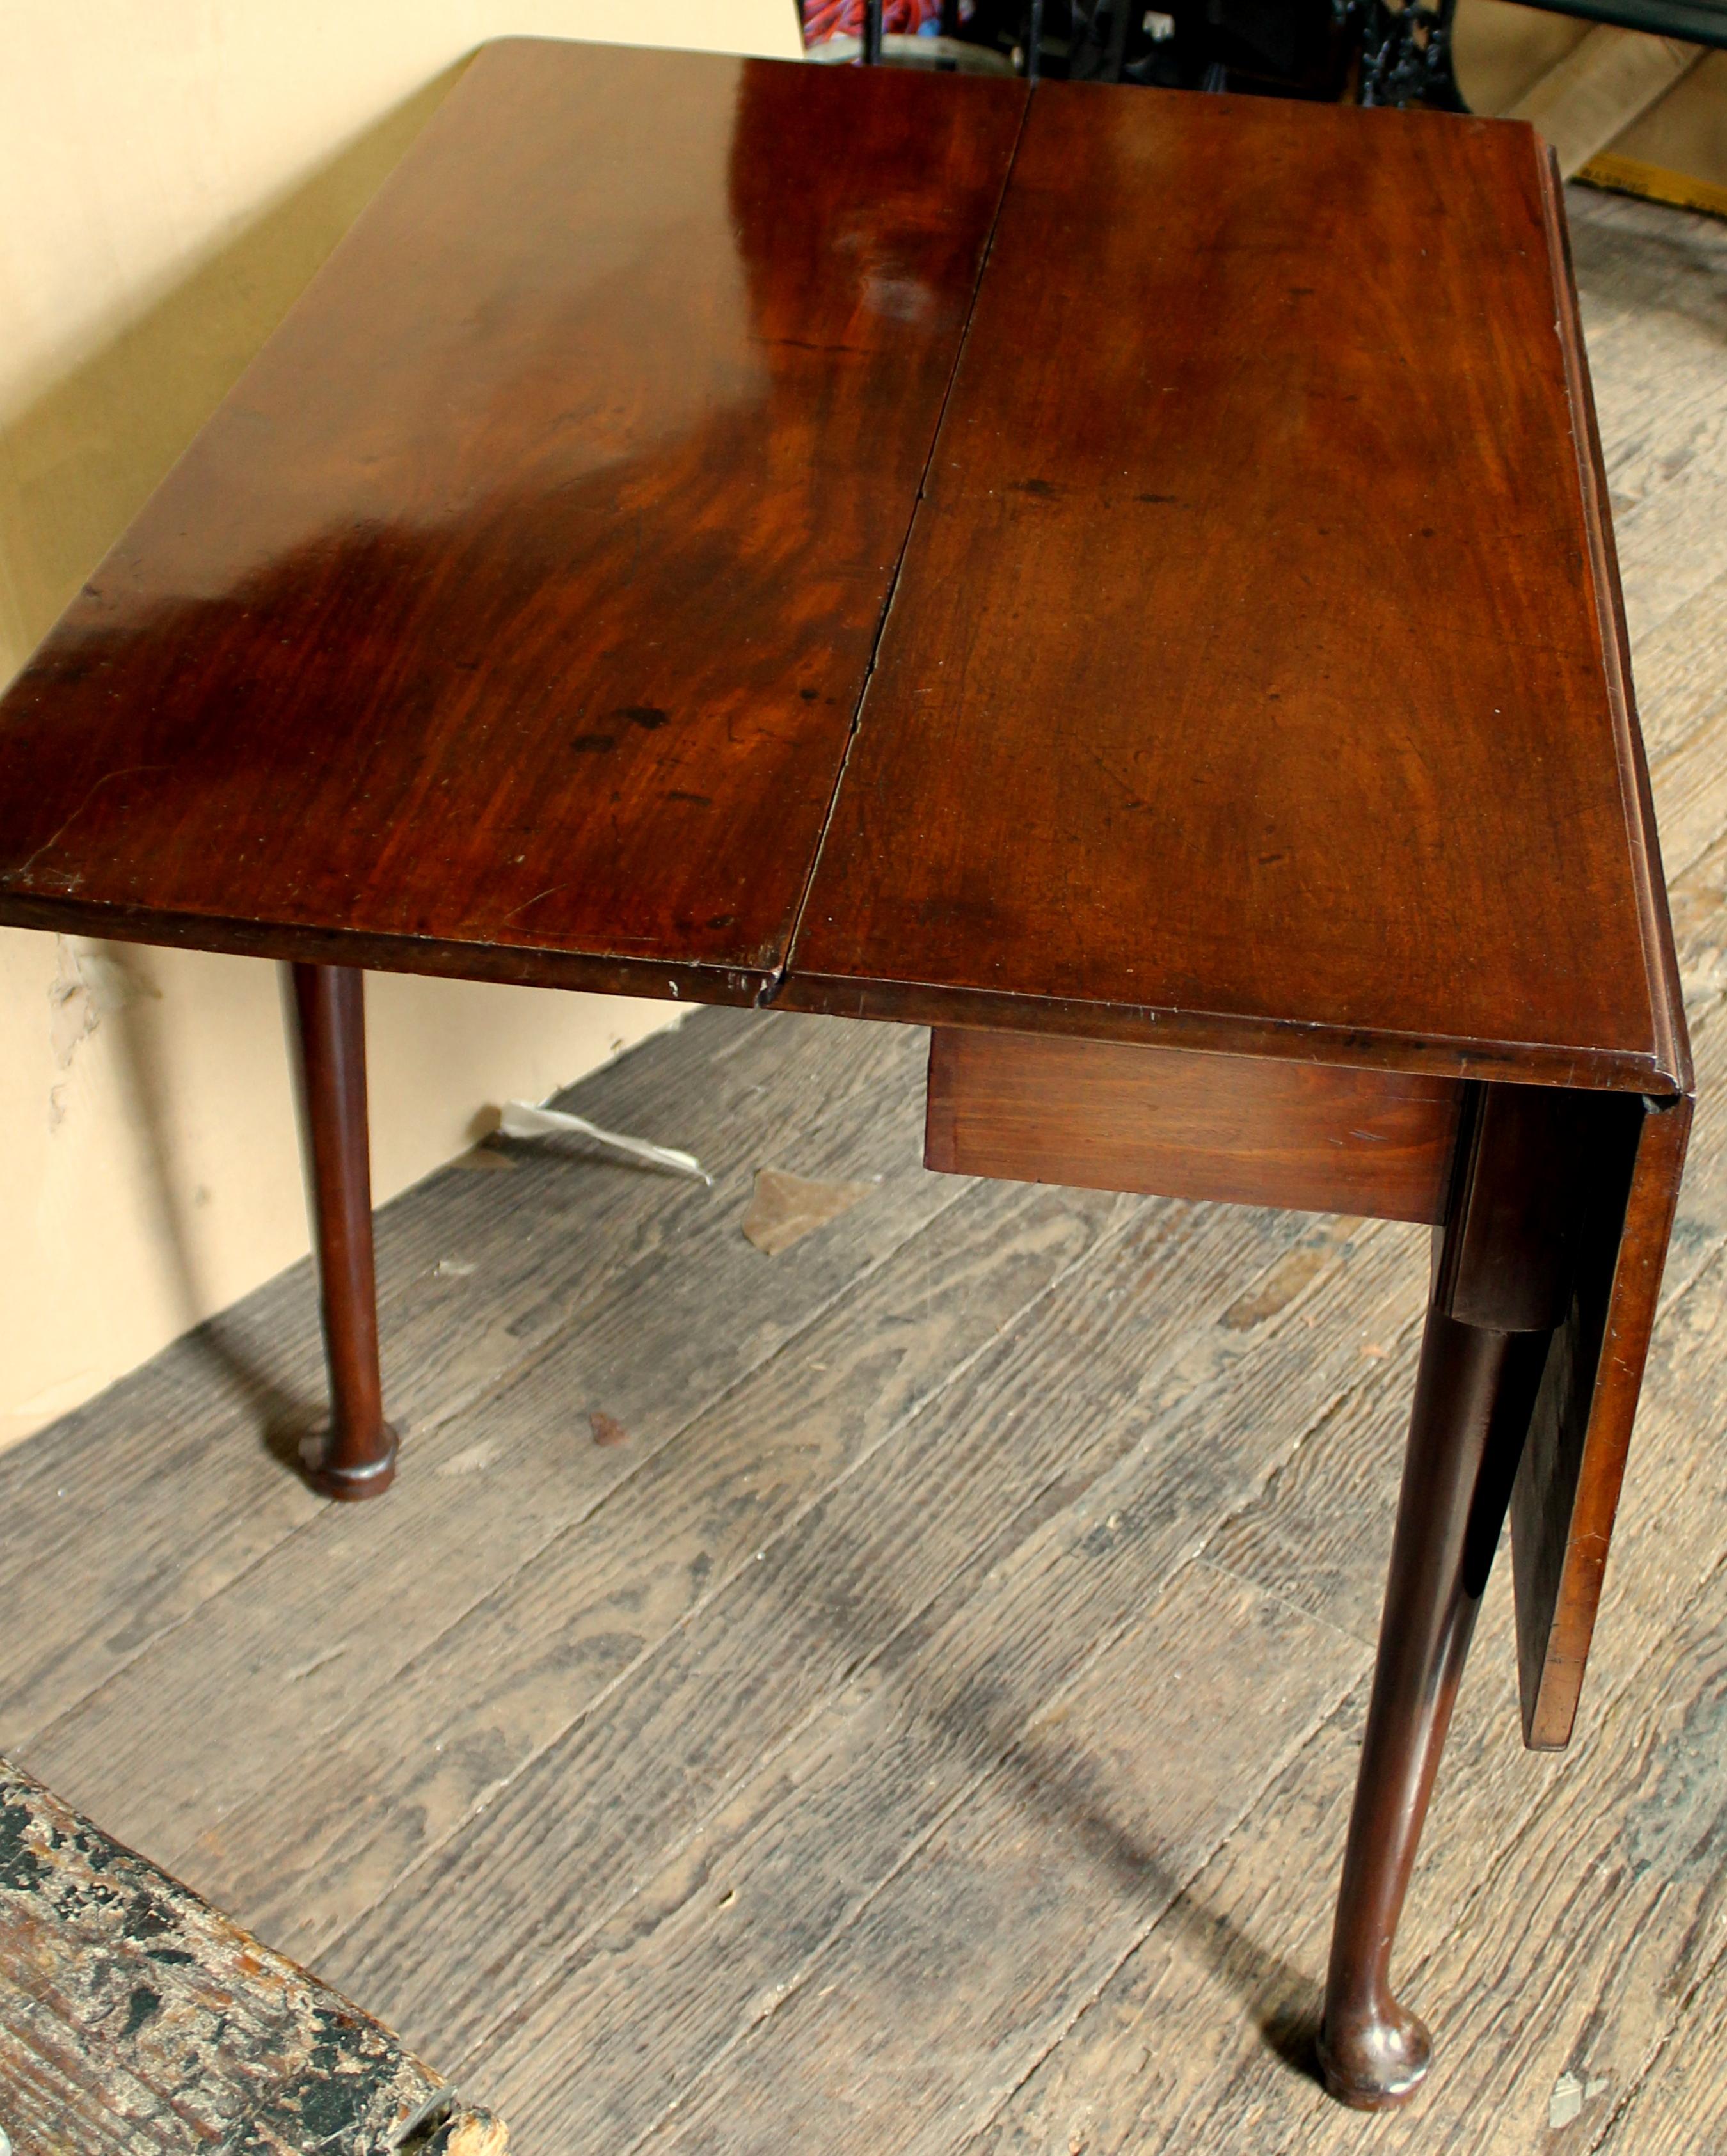 Fine quality antique American federal period solid mahogany Queen Anne style drop-leaf table

Please note very fine cabriole legs terminating in wonderful pad feet. Color and condition are superb. Dovetails and pegs as illustrated in images.